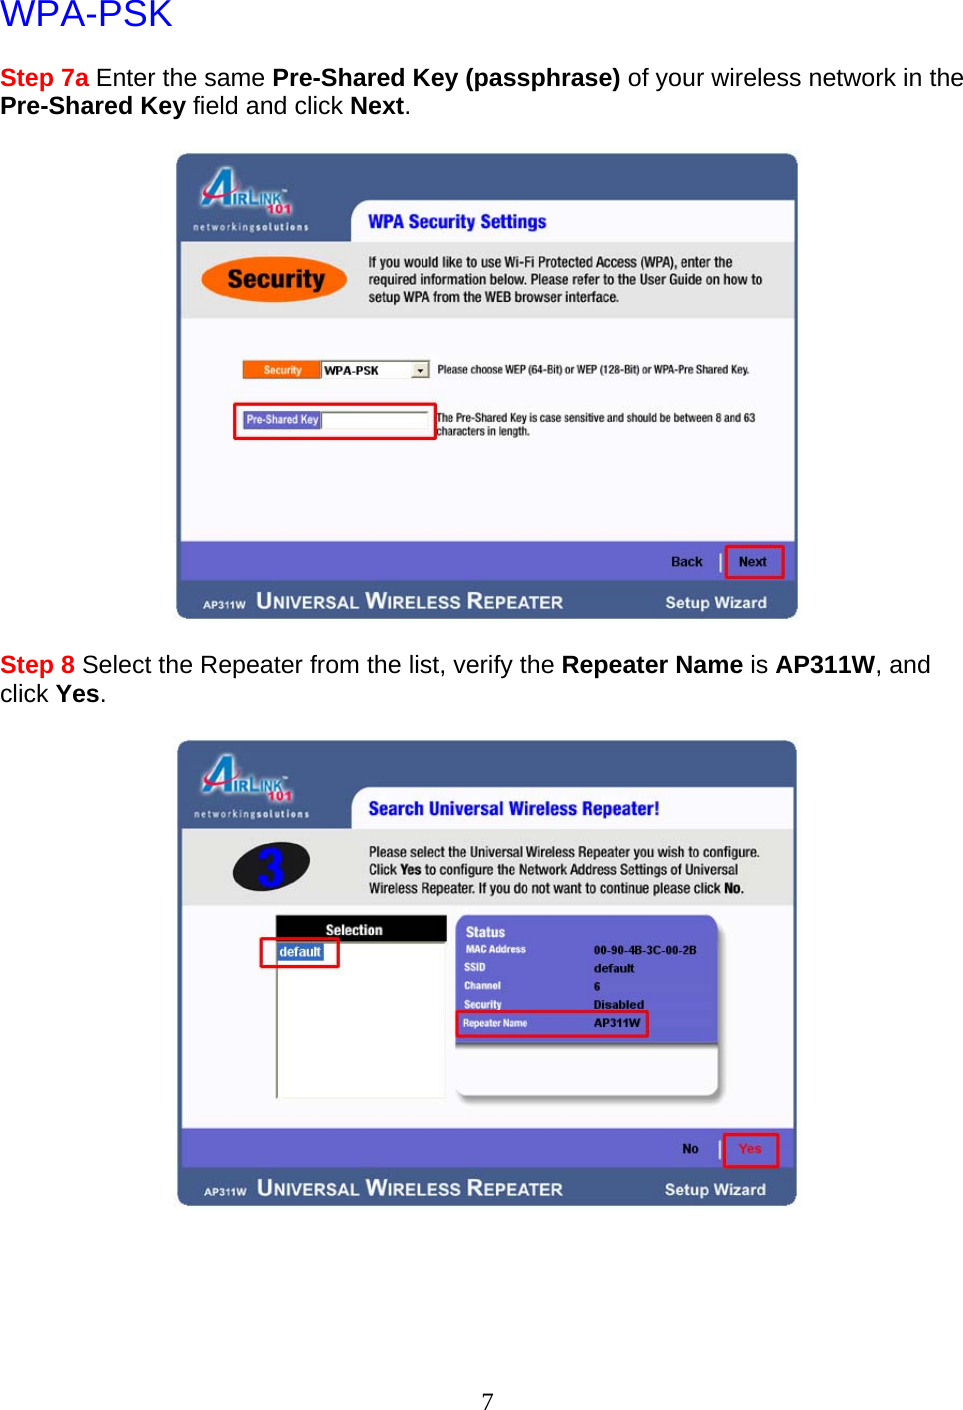 7 WPA-PSK  Step 7a Enter the same Pre-Shared Key (passphrase) of your wireless network in the Pre-Shared Key field and click Next.    Step 8 Select the Repeater from the list, verify the Repeater Name is AP311W, and click Yes.       